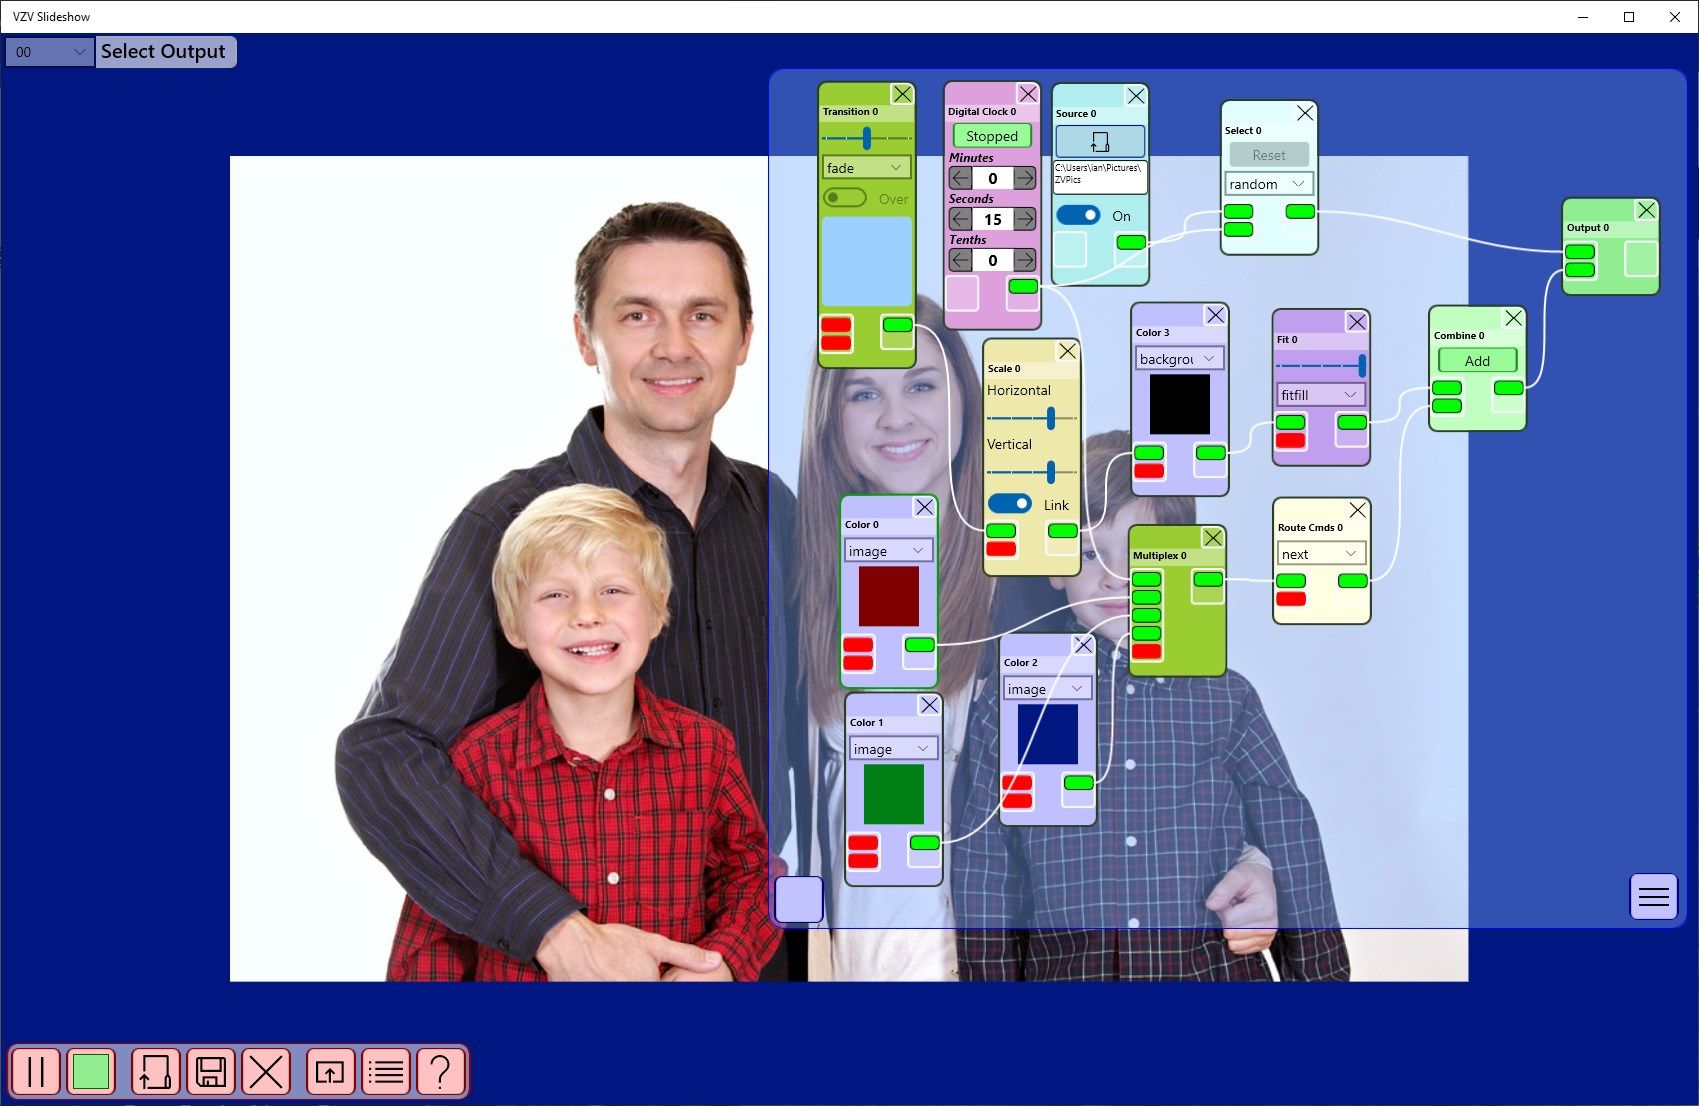 The Stock Photo family smile between the nodes.